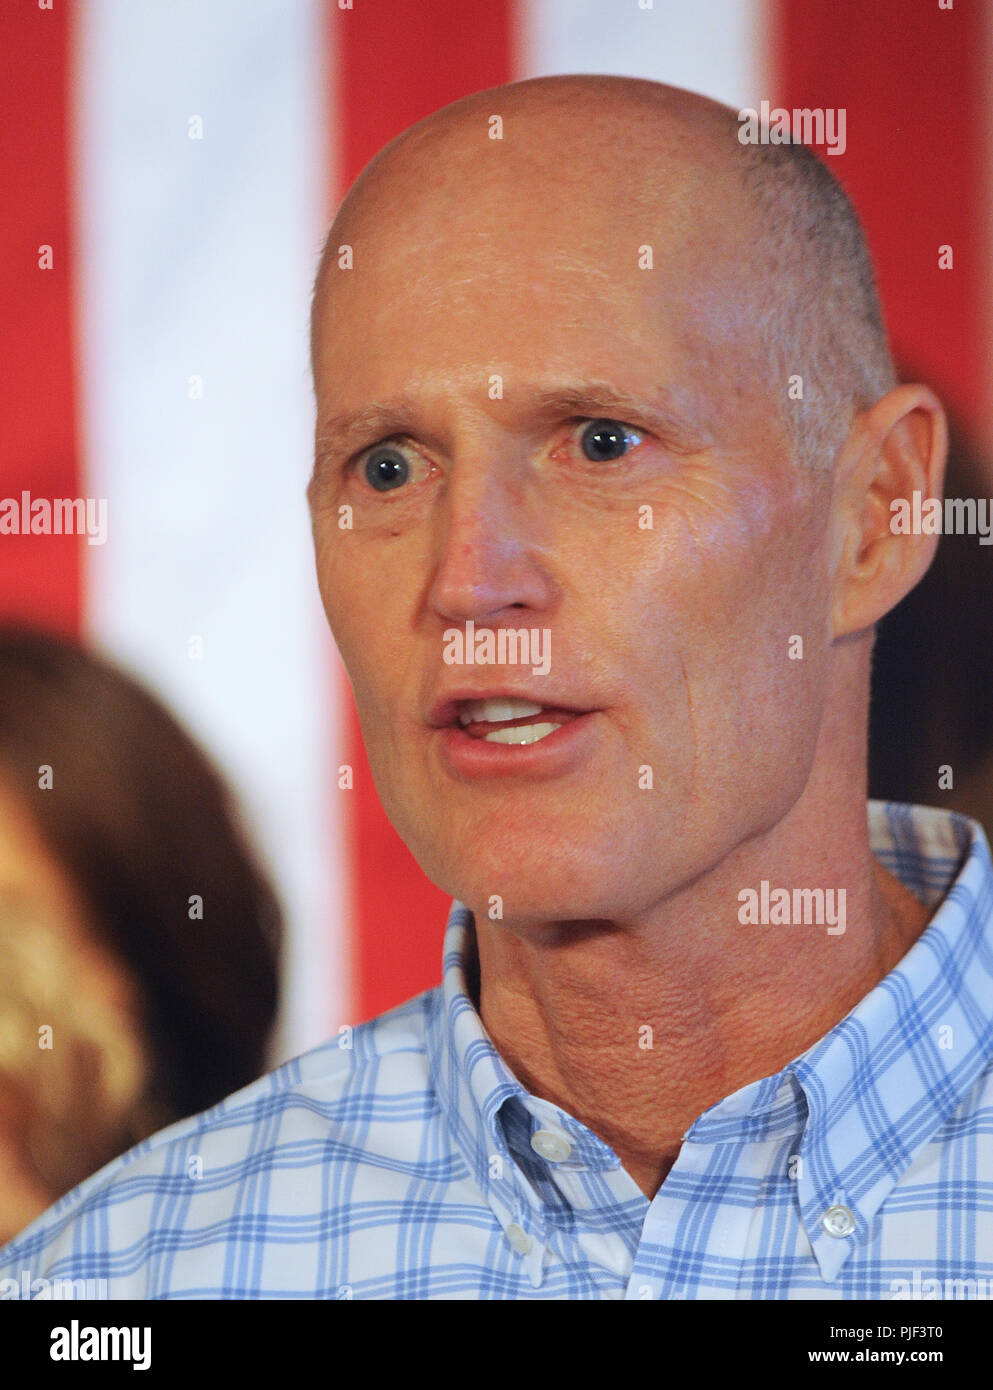 Orlando, Florida, USA. September 6, 2018 - Orlando, Florida, United States -  Florida Governor Rick Scott, Republican nominee for the U.S. Senate, addresses supporters at a Republican unity rally on September 6, 2018 at the Ace Cafe in Orlando, Florida. Scott is hoping to unseat Democratic U.S. Senator Bill Nelson. (Paul Hennessy/Alamy) Credit: Paul Hennessy/Alamy Live News Stock Photo